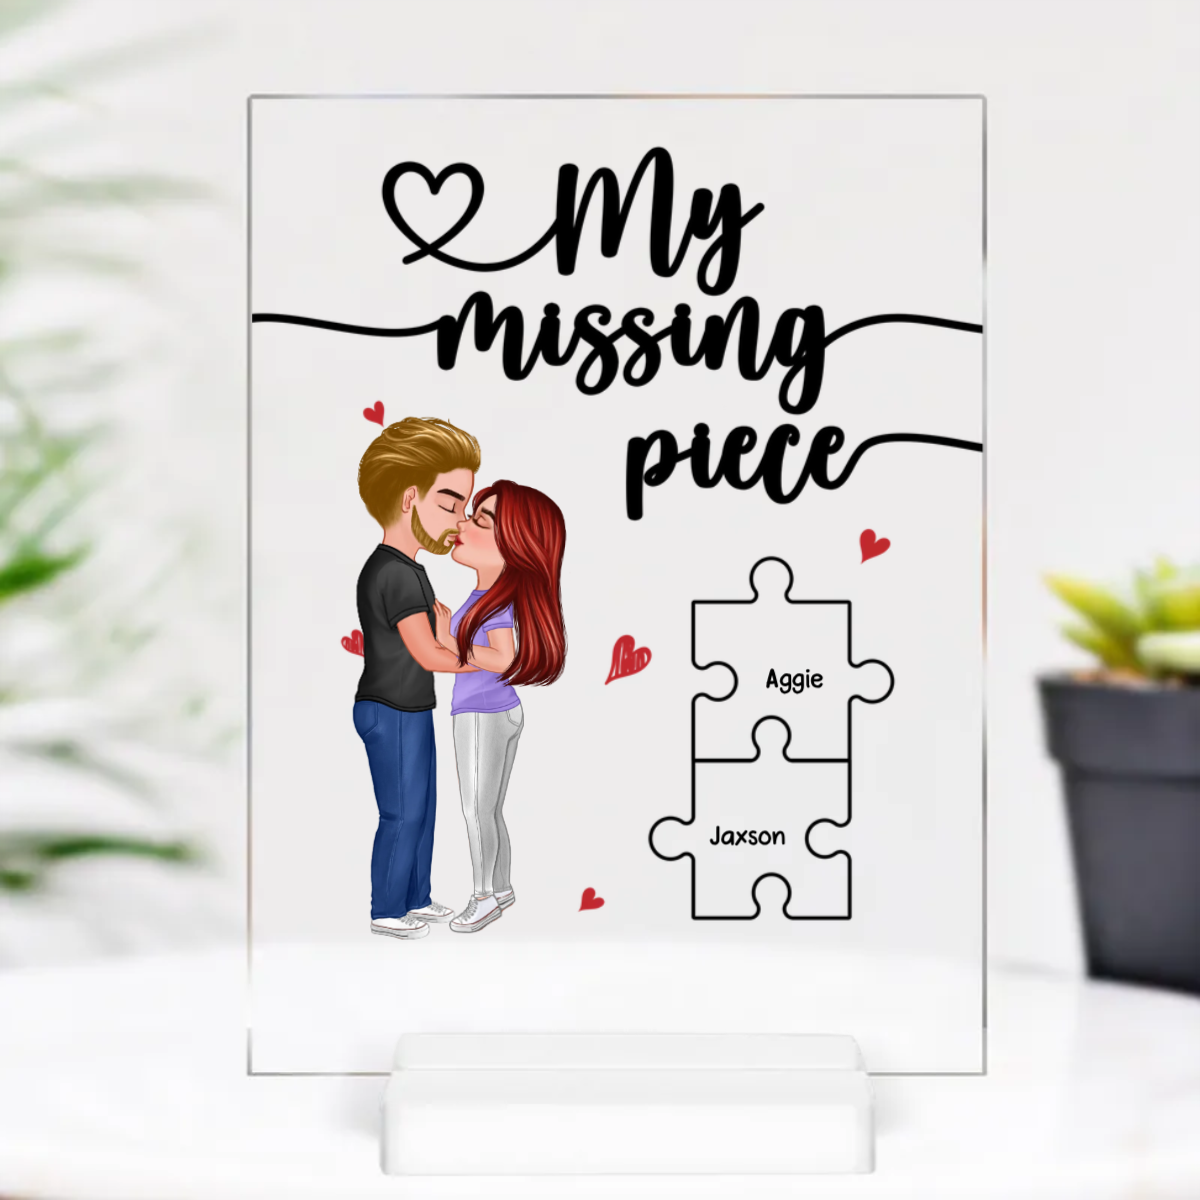 My Missing Piece Couple Kissing Valentine‘s Day Gift For Her Gift For Him Personalized Acrylic Plaque